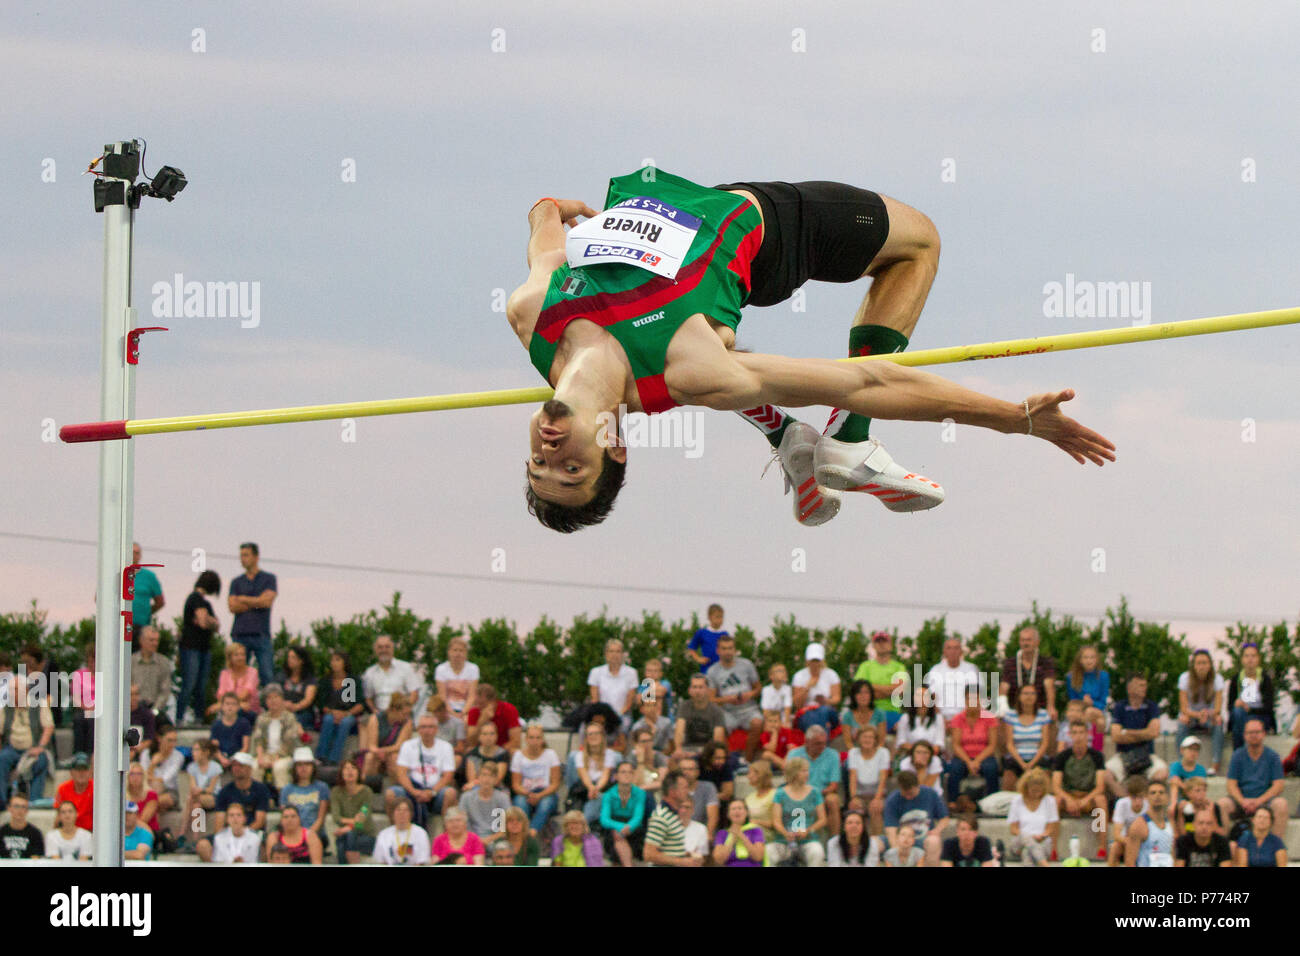 Mexican high jumper Edgar Rivera competing at the P-T-S athletics meeting in the sports site of x-bionic sphere® in Samorín, Slovakia Stock Photo